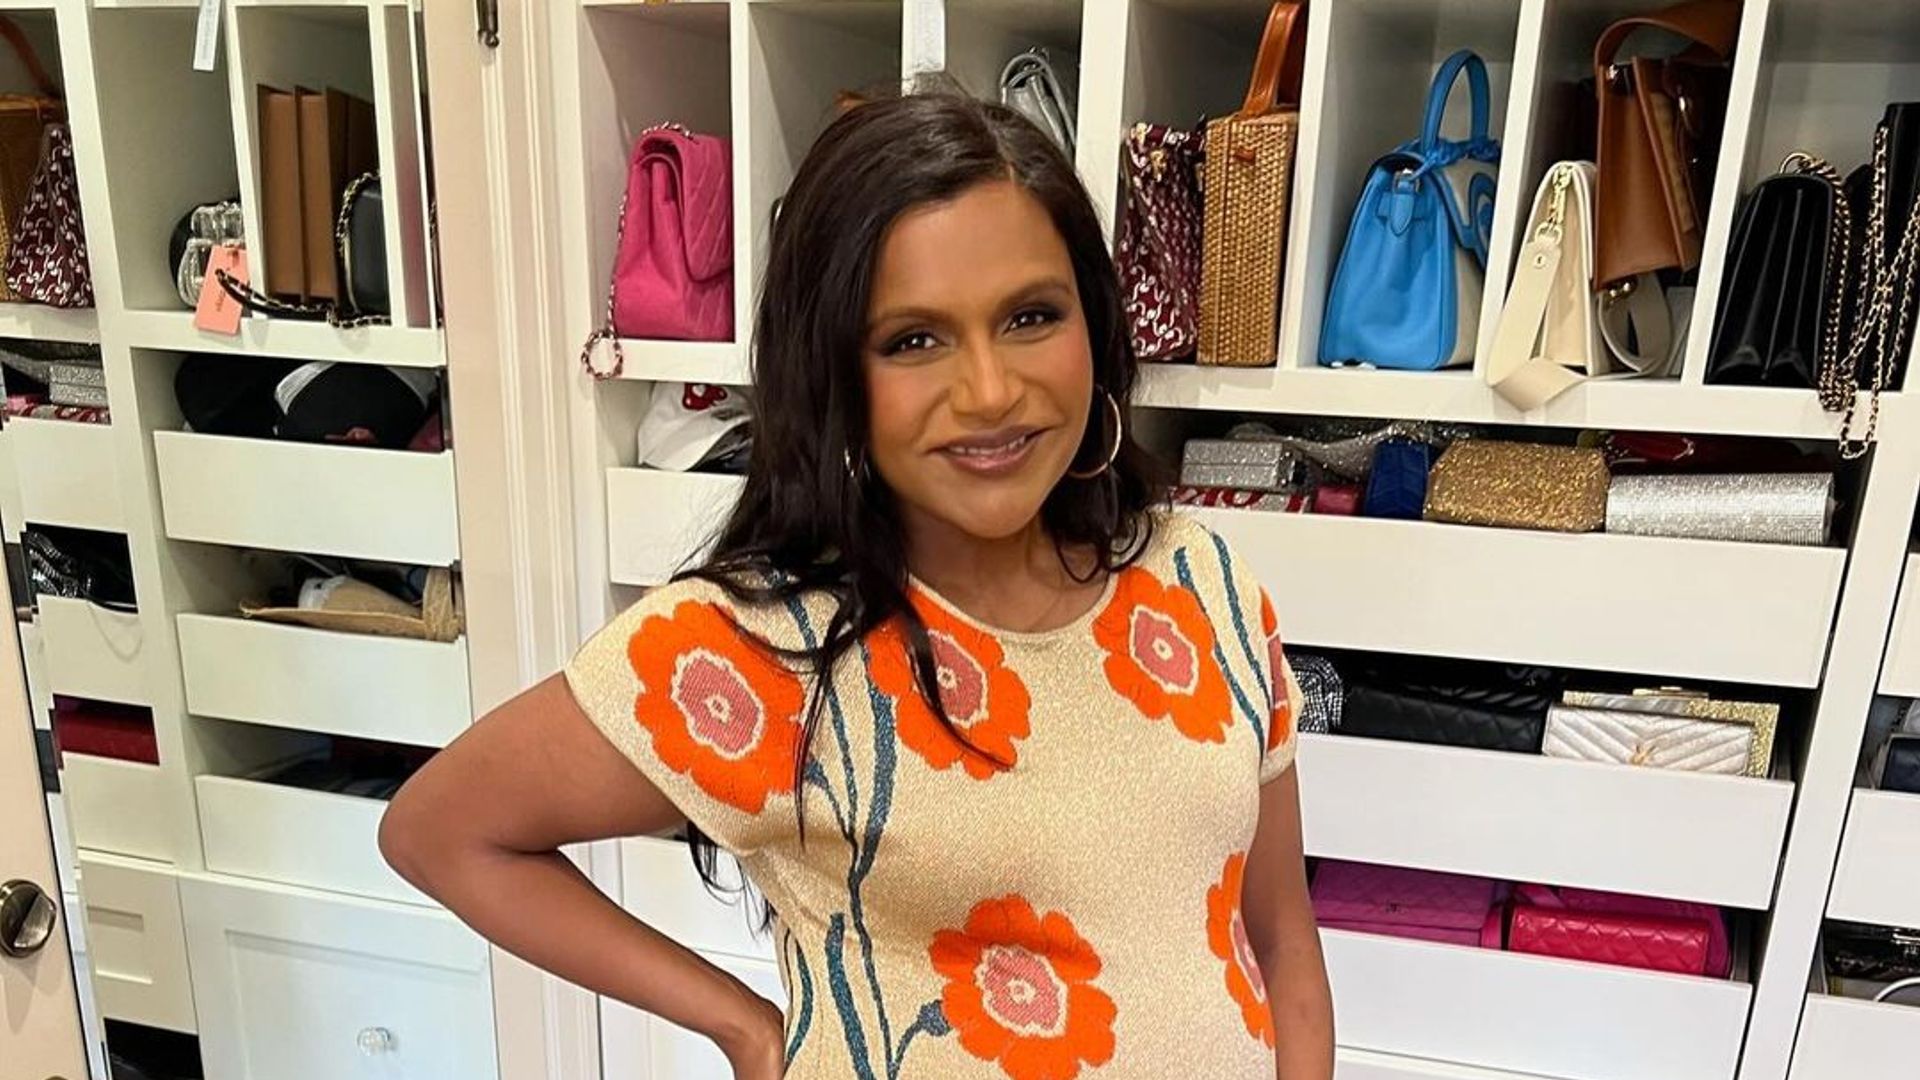 Mindy Kaling displays her baby bump from her third pregnancy with Anne, which she'd kept a secret